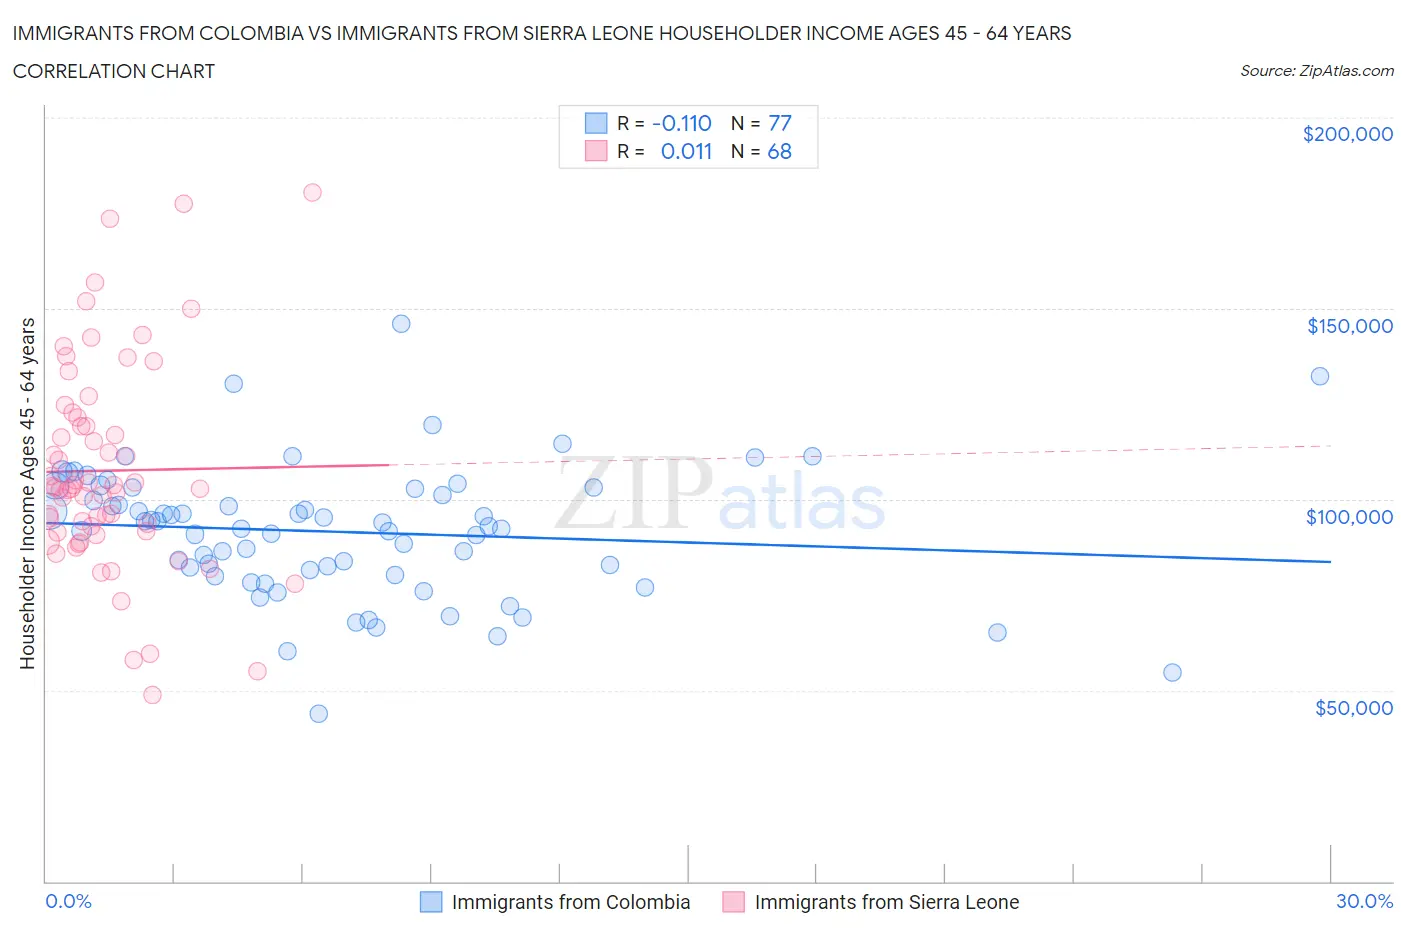 Immigrants from Colombia vs Immigrants from Sierra Leone Householder Income Ages 45 - 64 years